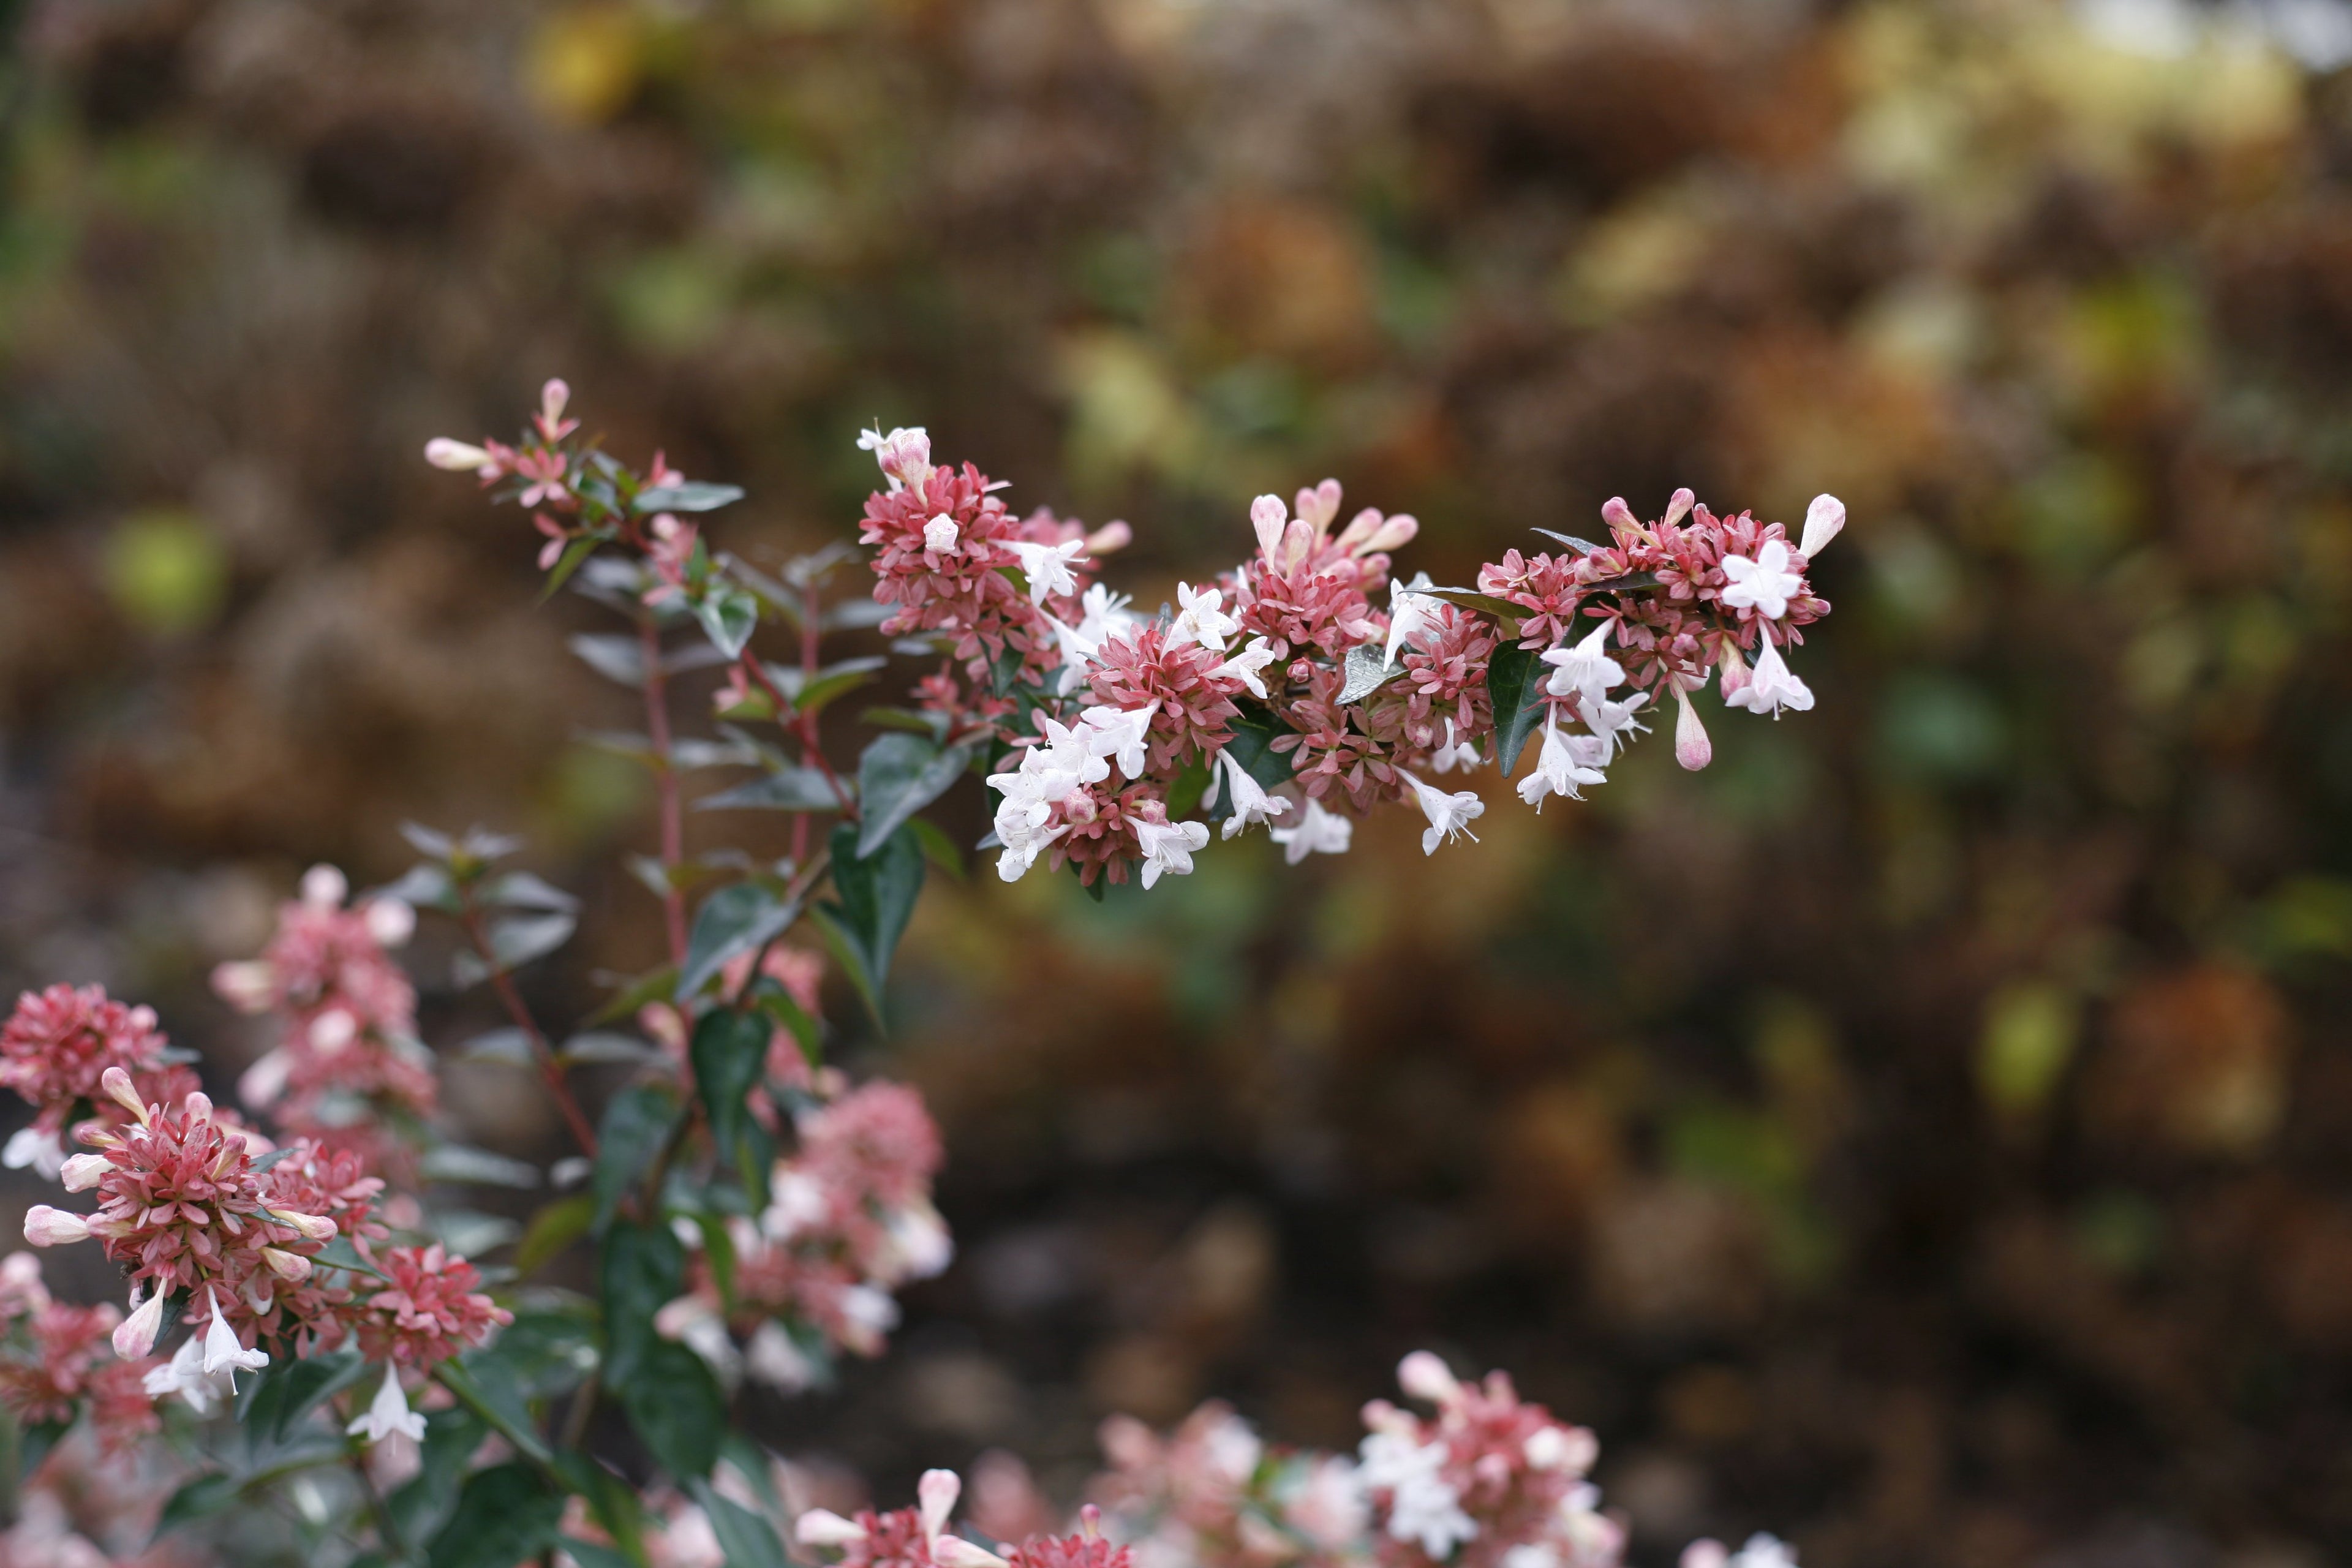 A closeup of the white flowers and pink bracts of Ruby Anniversary abelia.